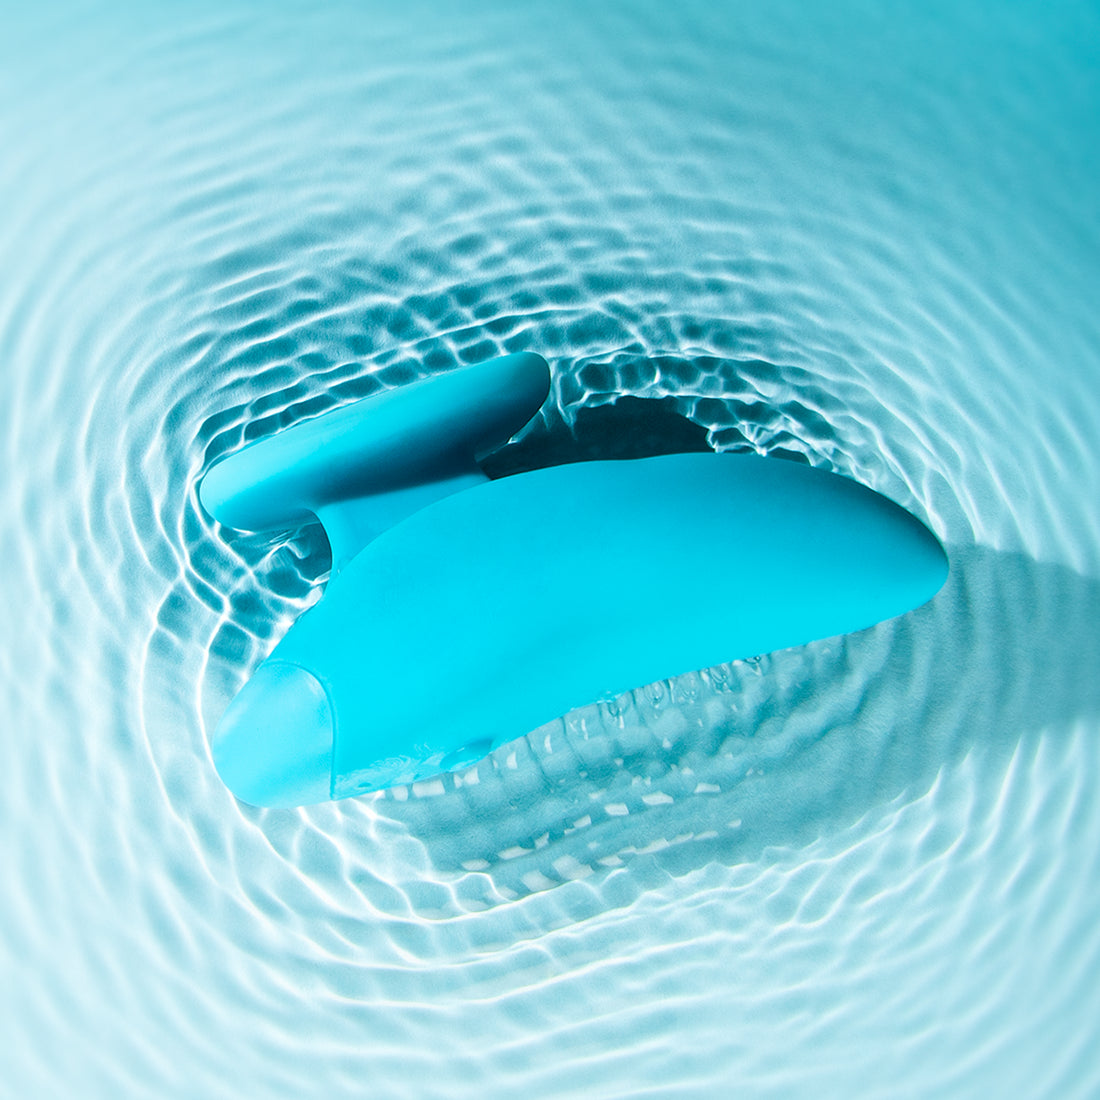 Self + Jimmyjane vibrating massager with finger grip in light blue laying in rippling water